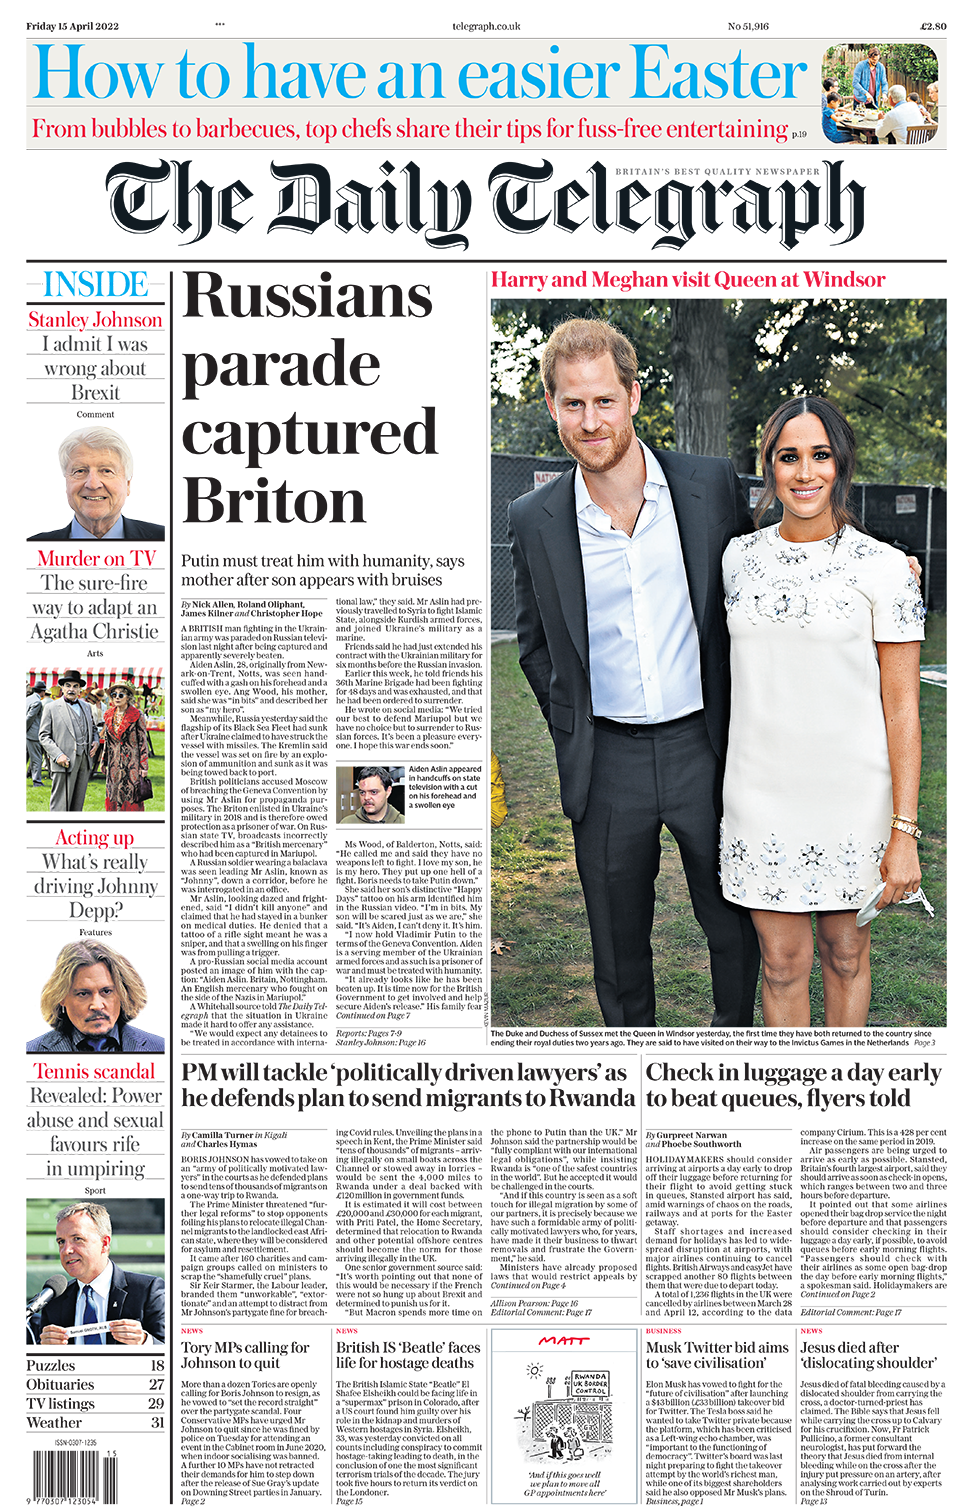 The headline in the Telegraph reads: "Russians parade captured Briton"